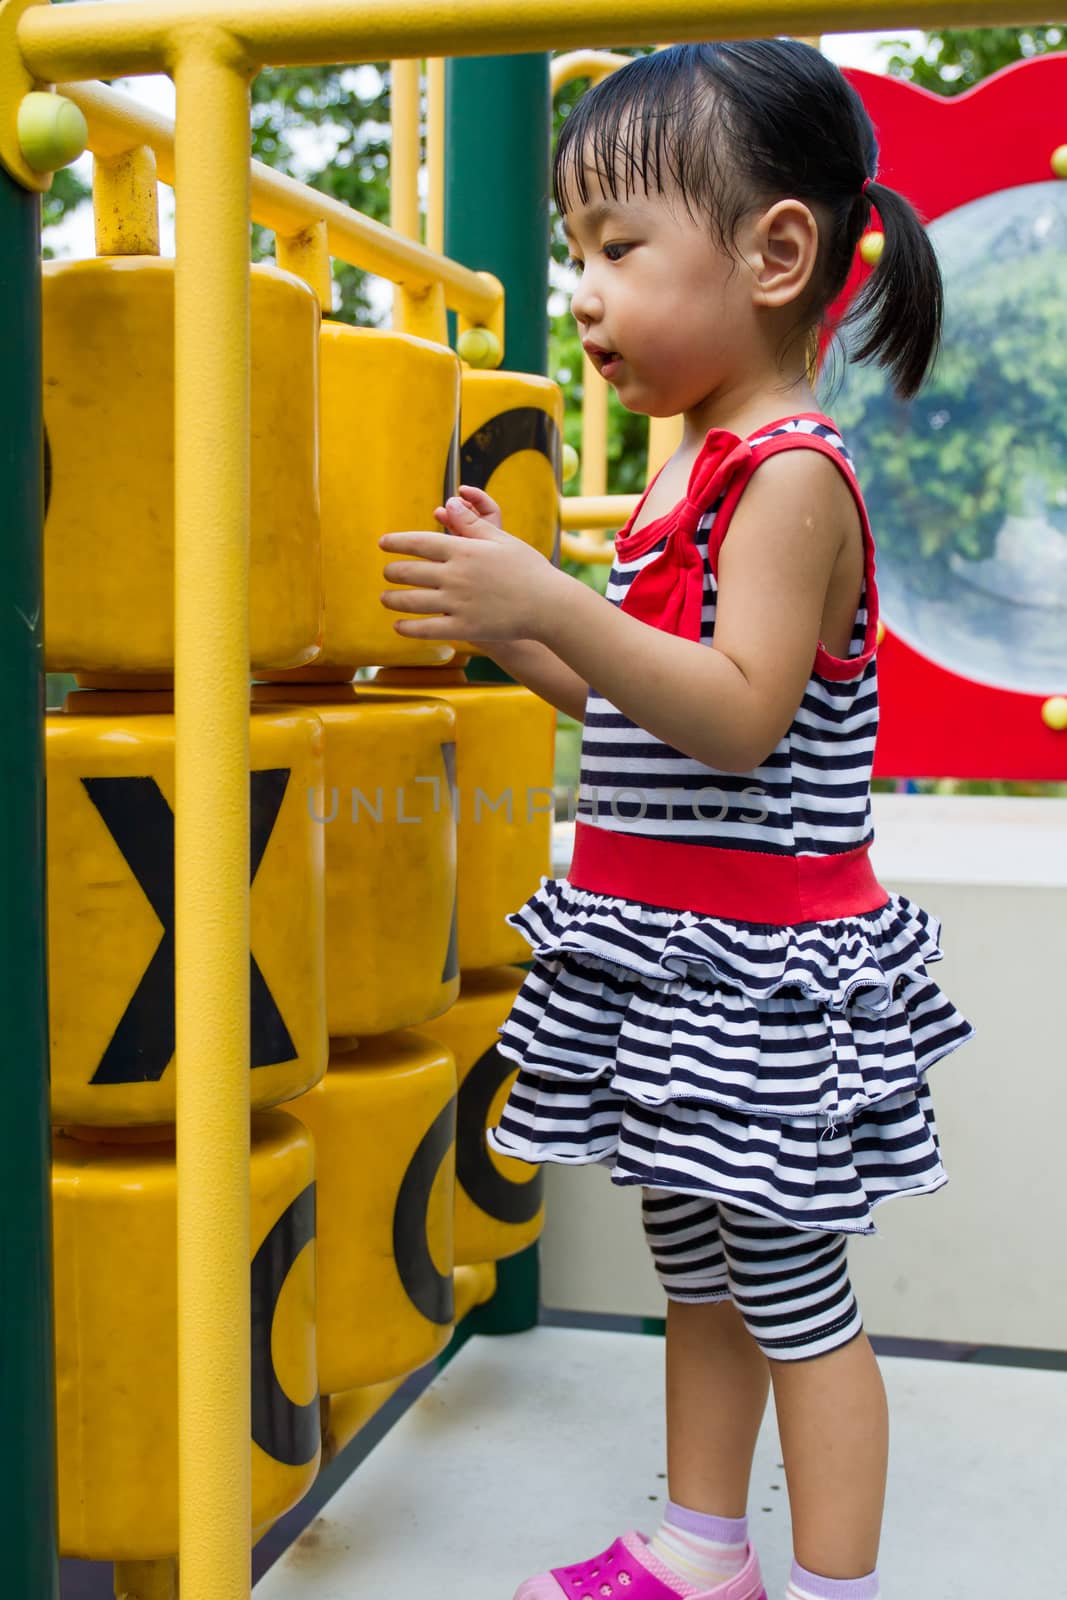 Asian Kid playing on Playground by kiankhoon